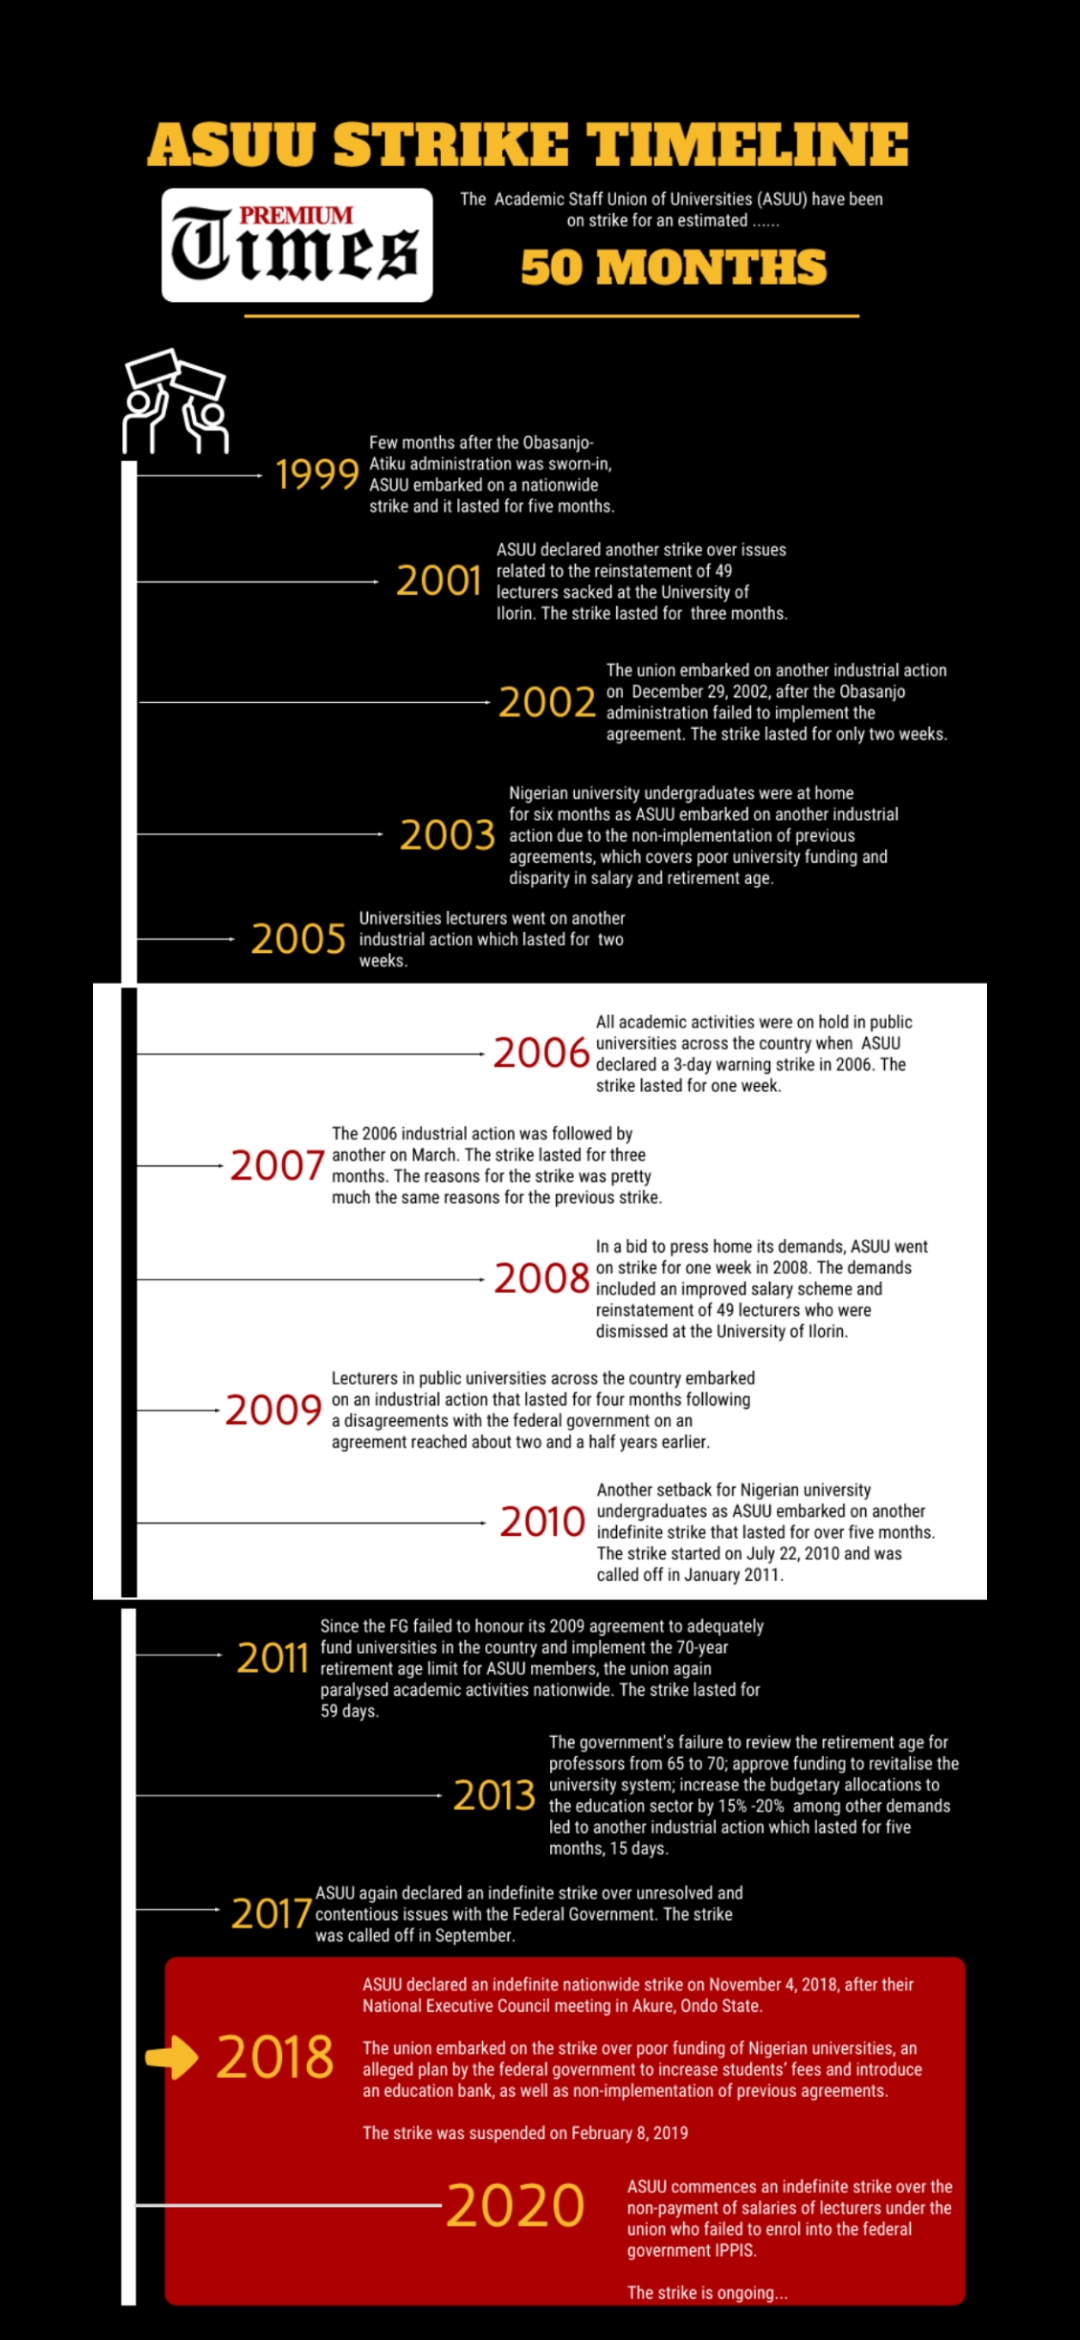 Infographic one: Timeline of strikes since 1999